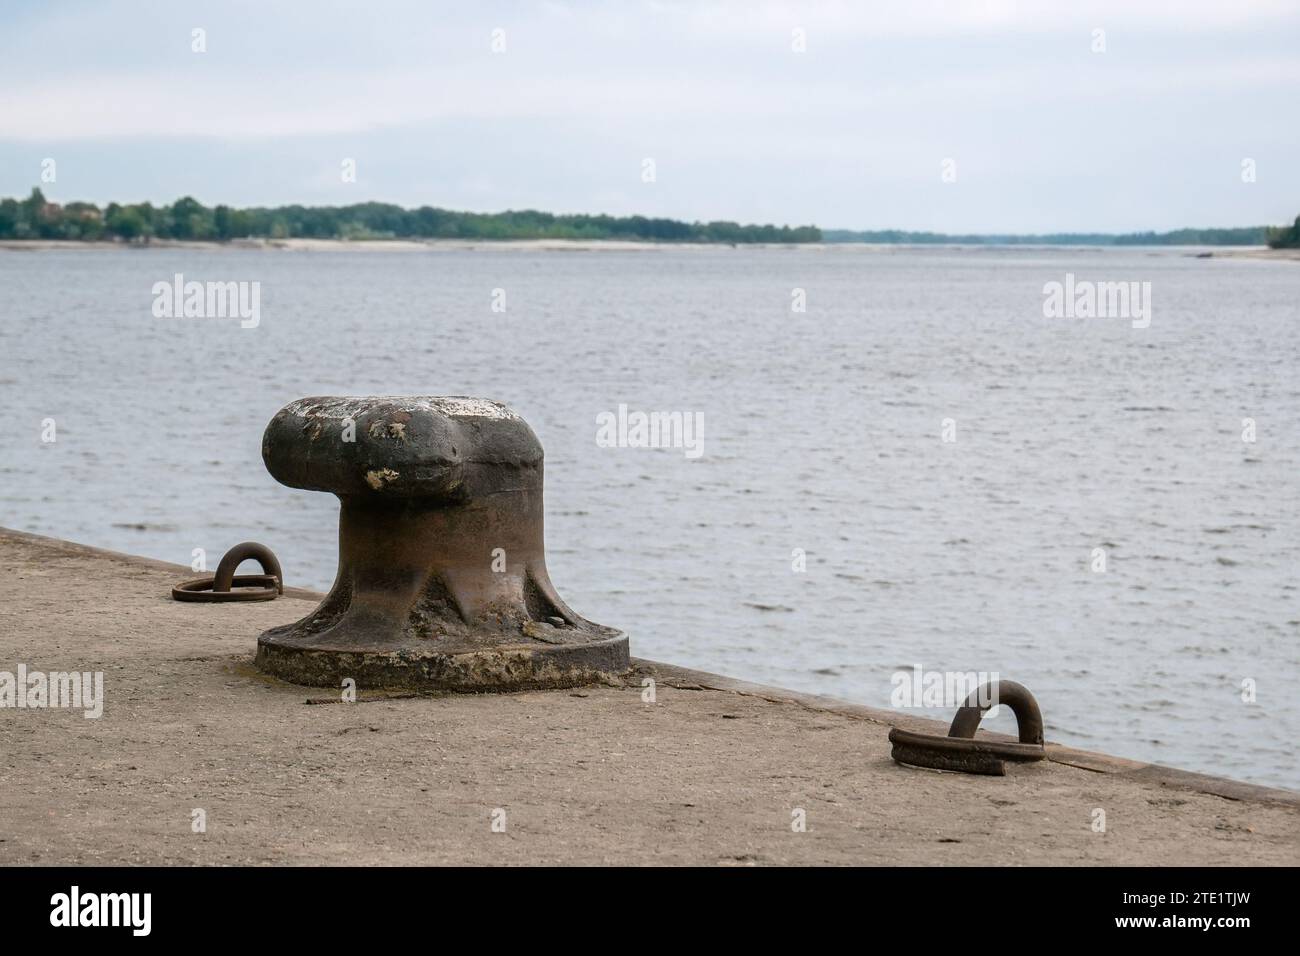 Old cast-iron bollard on the pier of the river pier Stock Photo